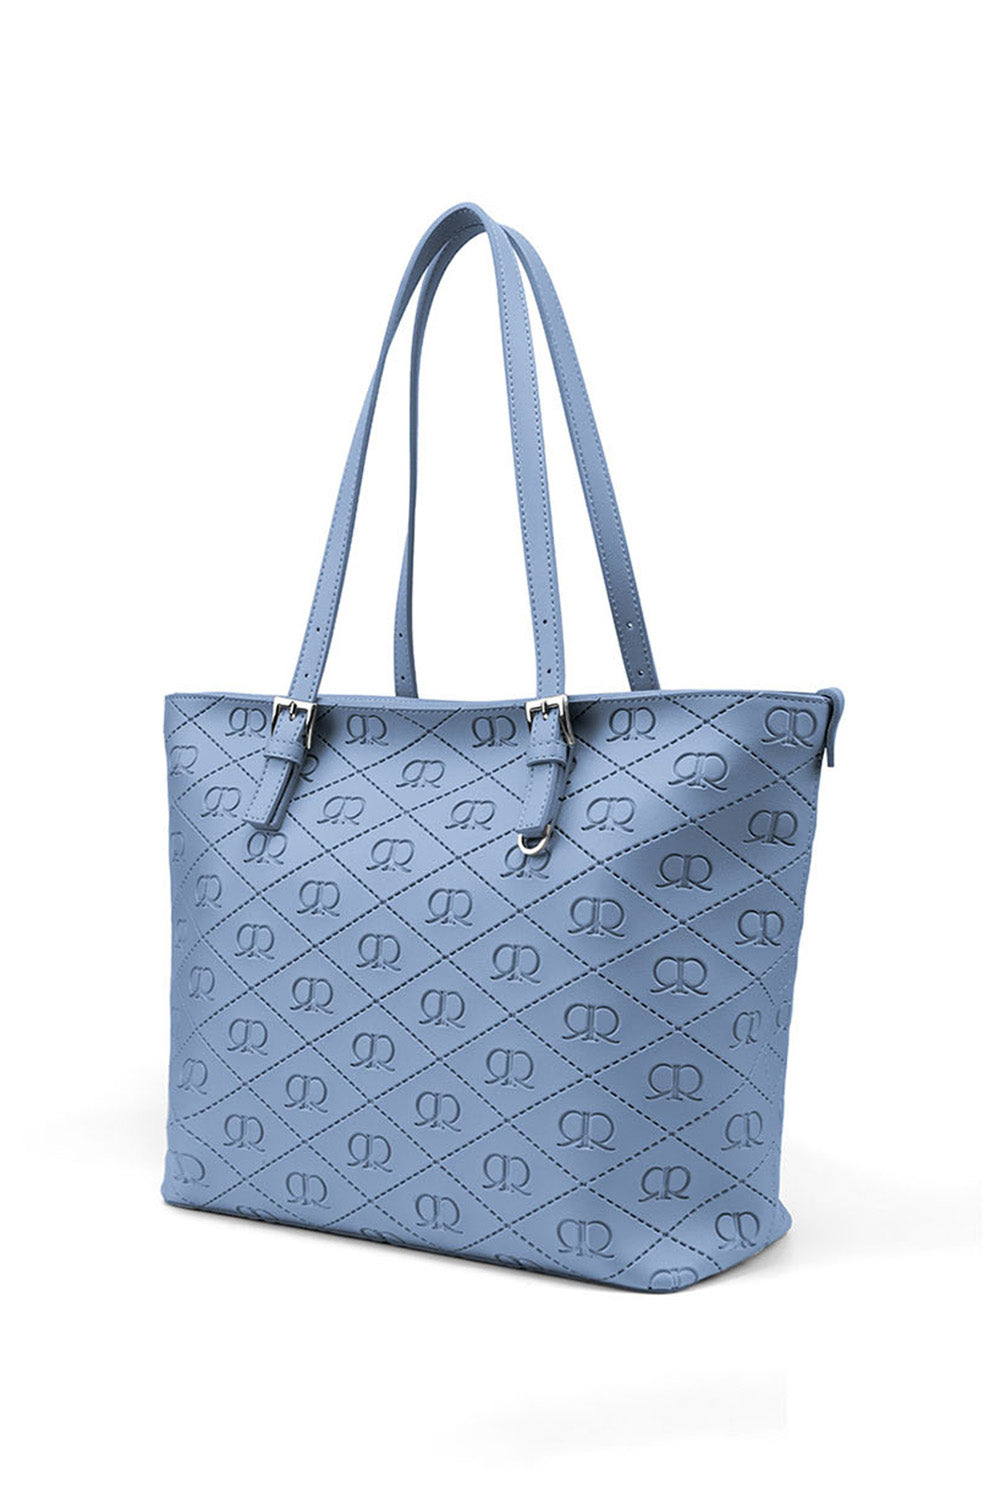 RR Basic Tote in Blue